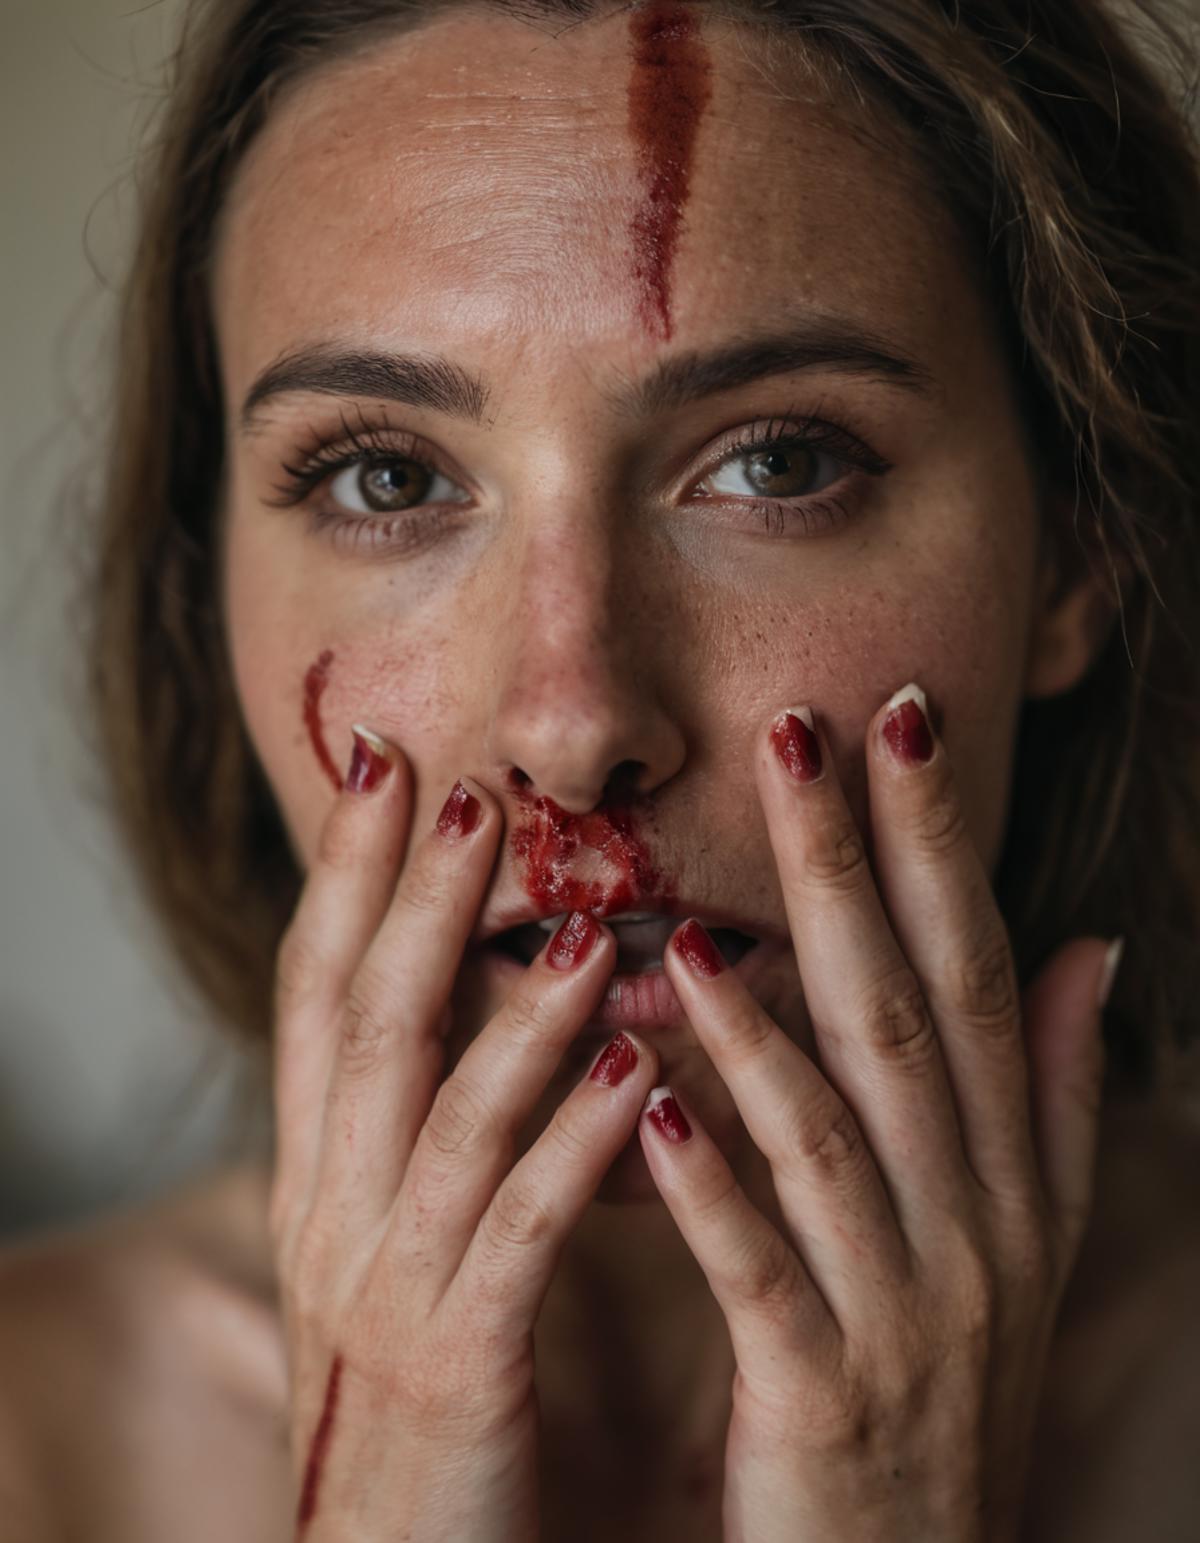 A woman with blood on her cheek and red nail polish on her fingers.